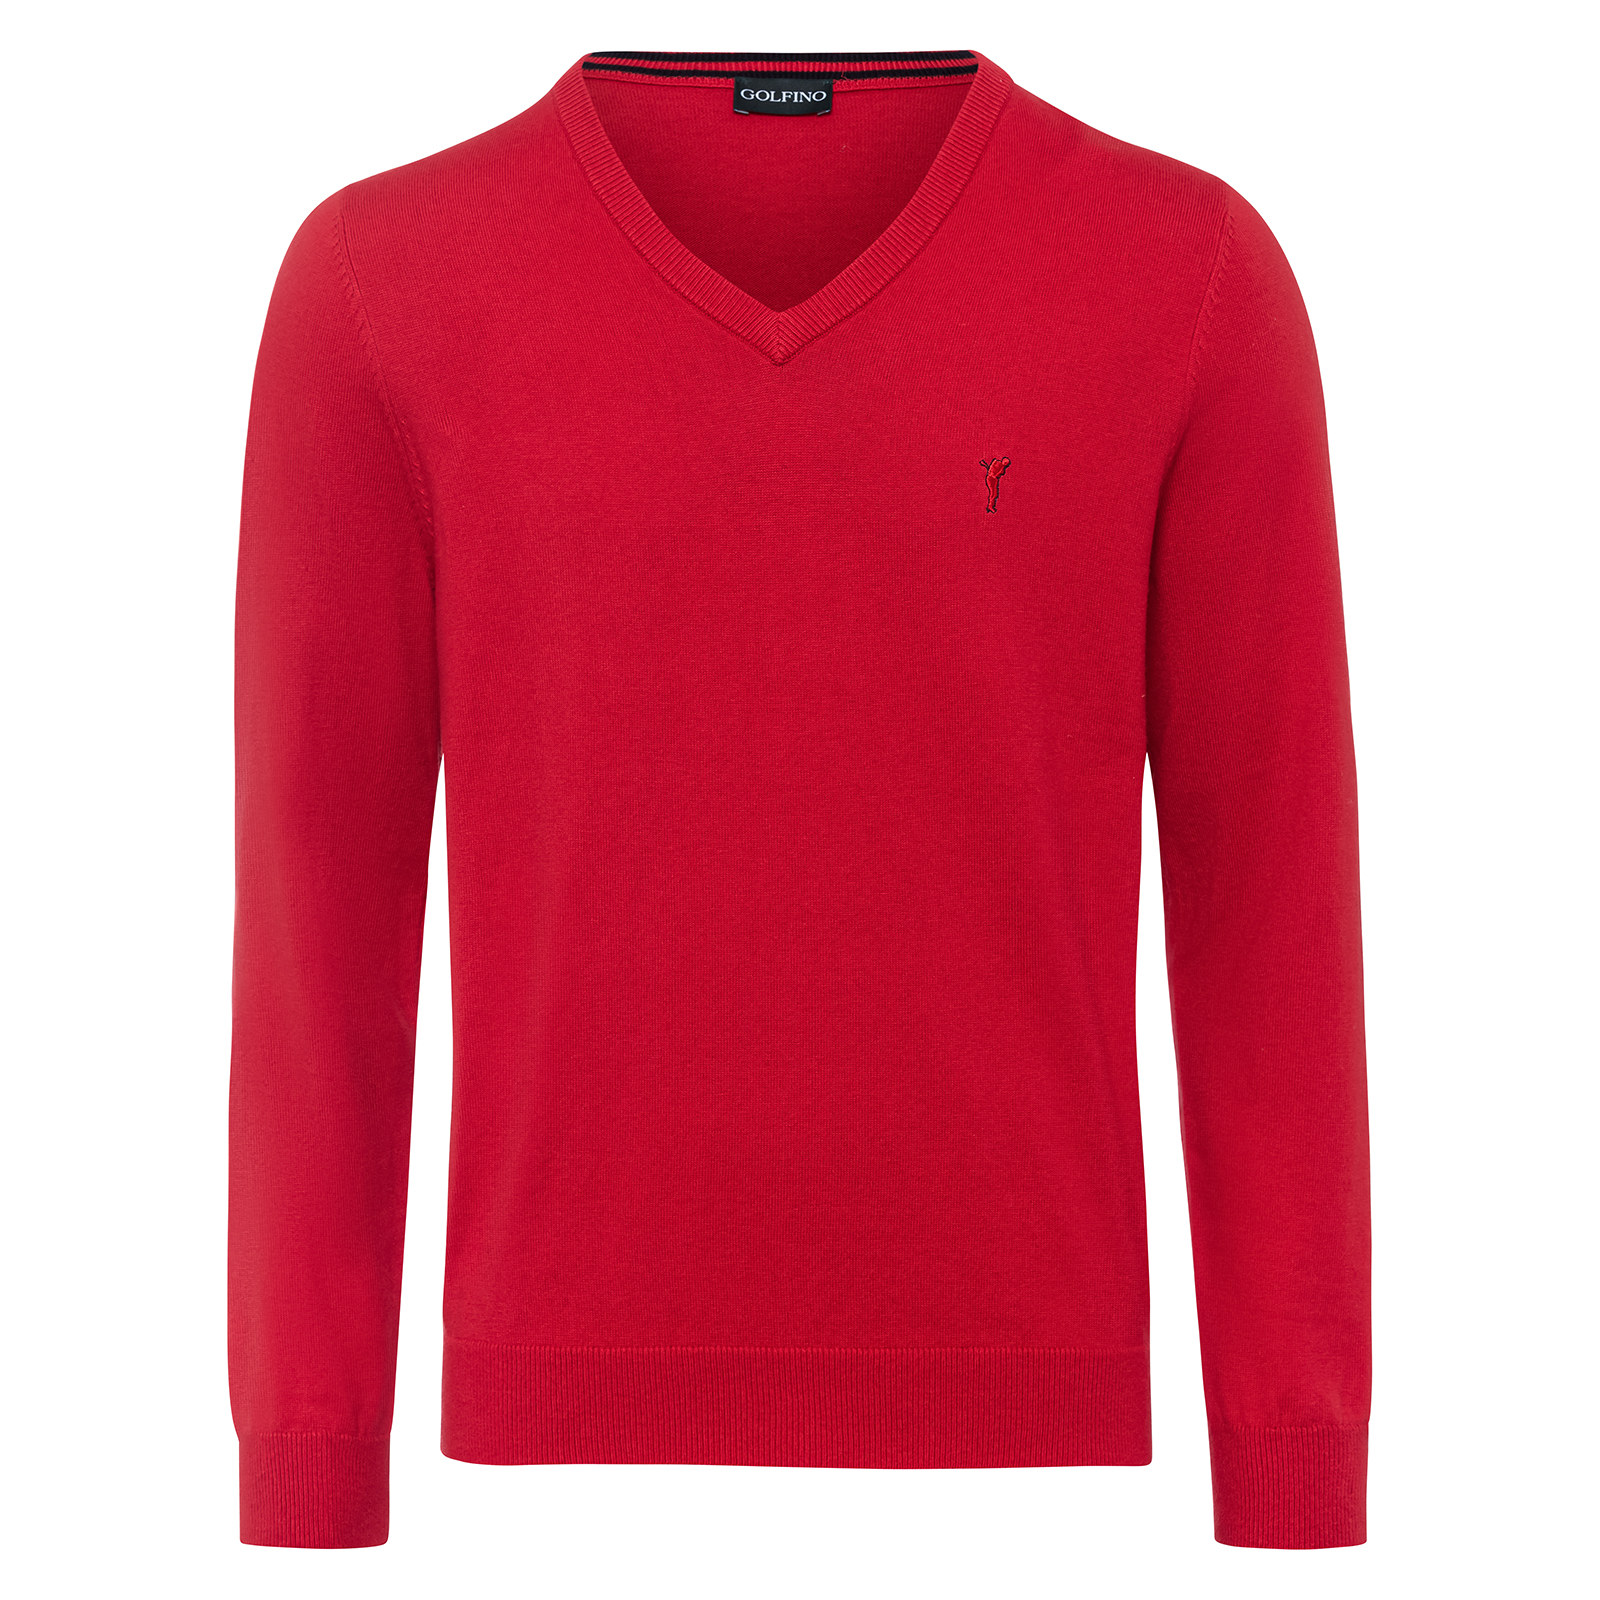 Men's knitted sweater made from a blend of cotton and cashmere wool 